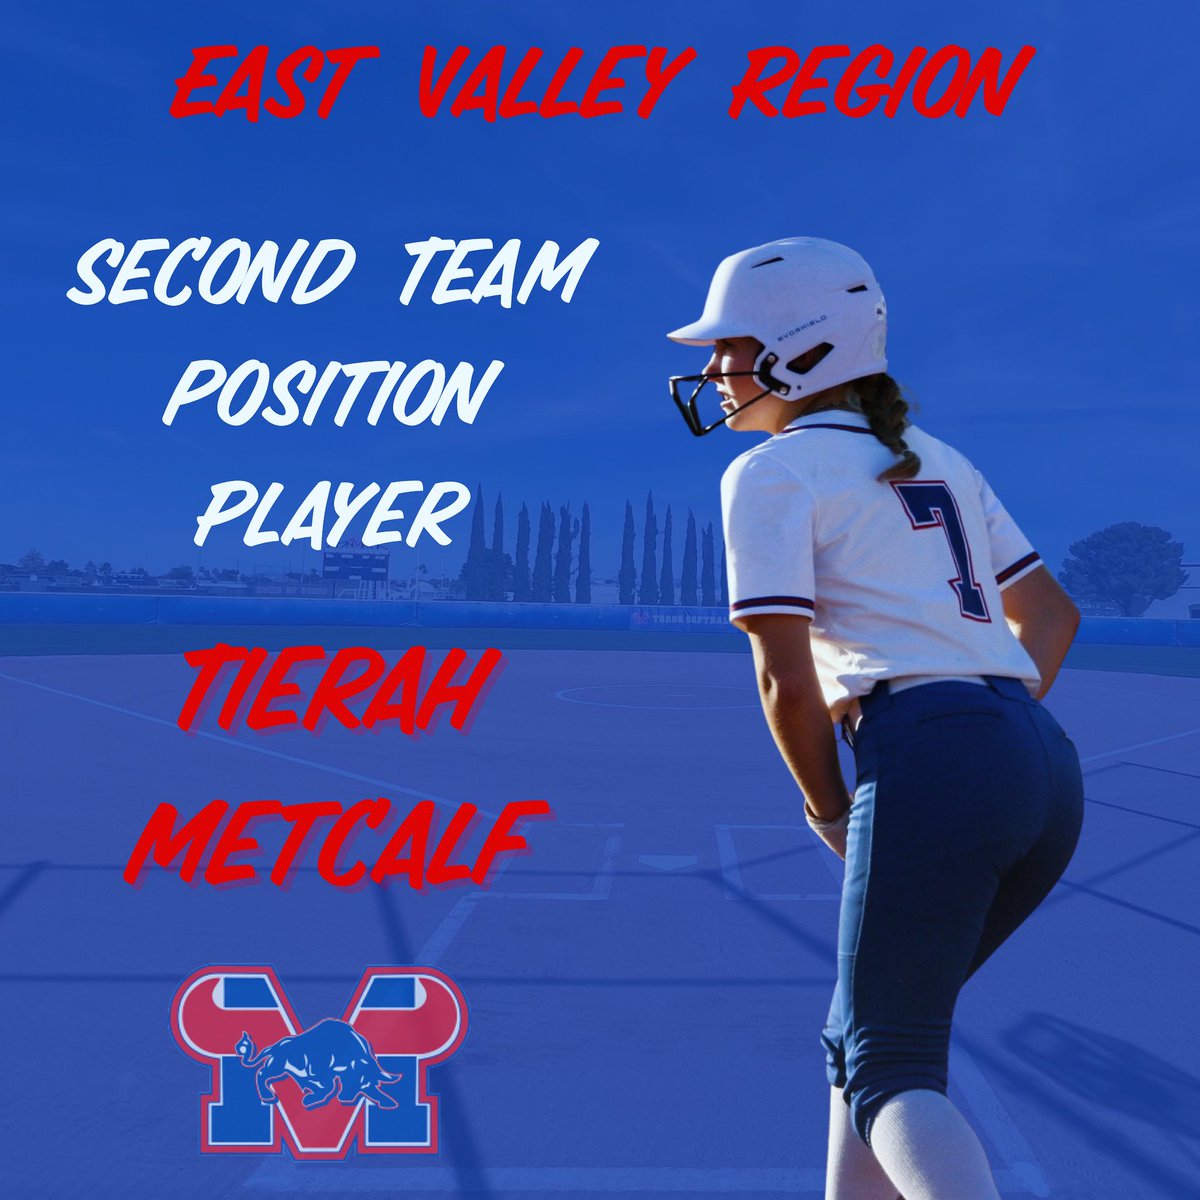 Freshman Tierah Metcalf is awarded Second Team Position Player for East Valley Region. Congratulations on a great season Tierah!